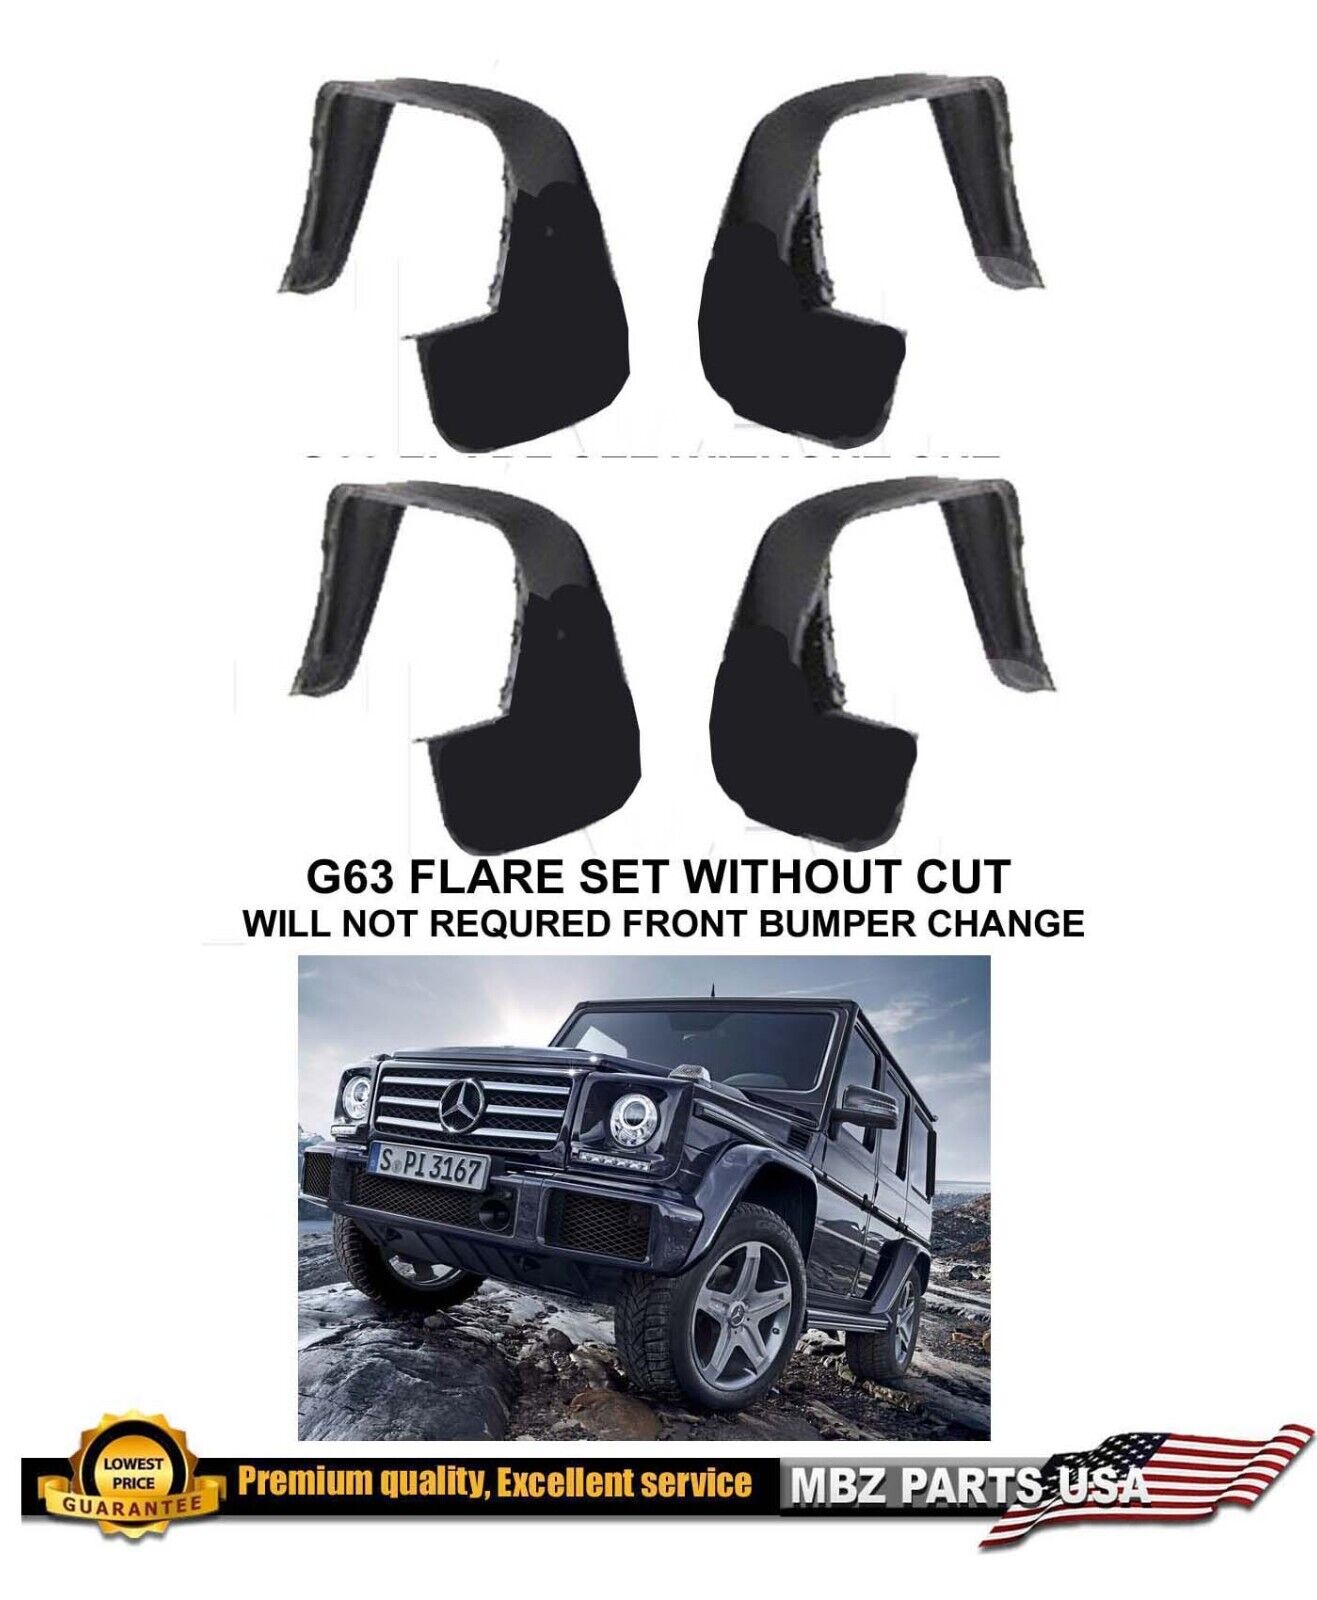 G55 G500 AMG fender flares WITHOUT CUT G-Wagon 2 Front Left + R front Right